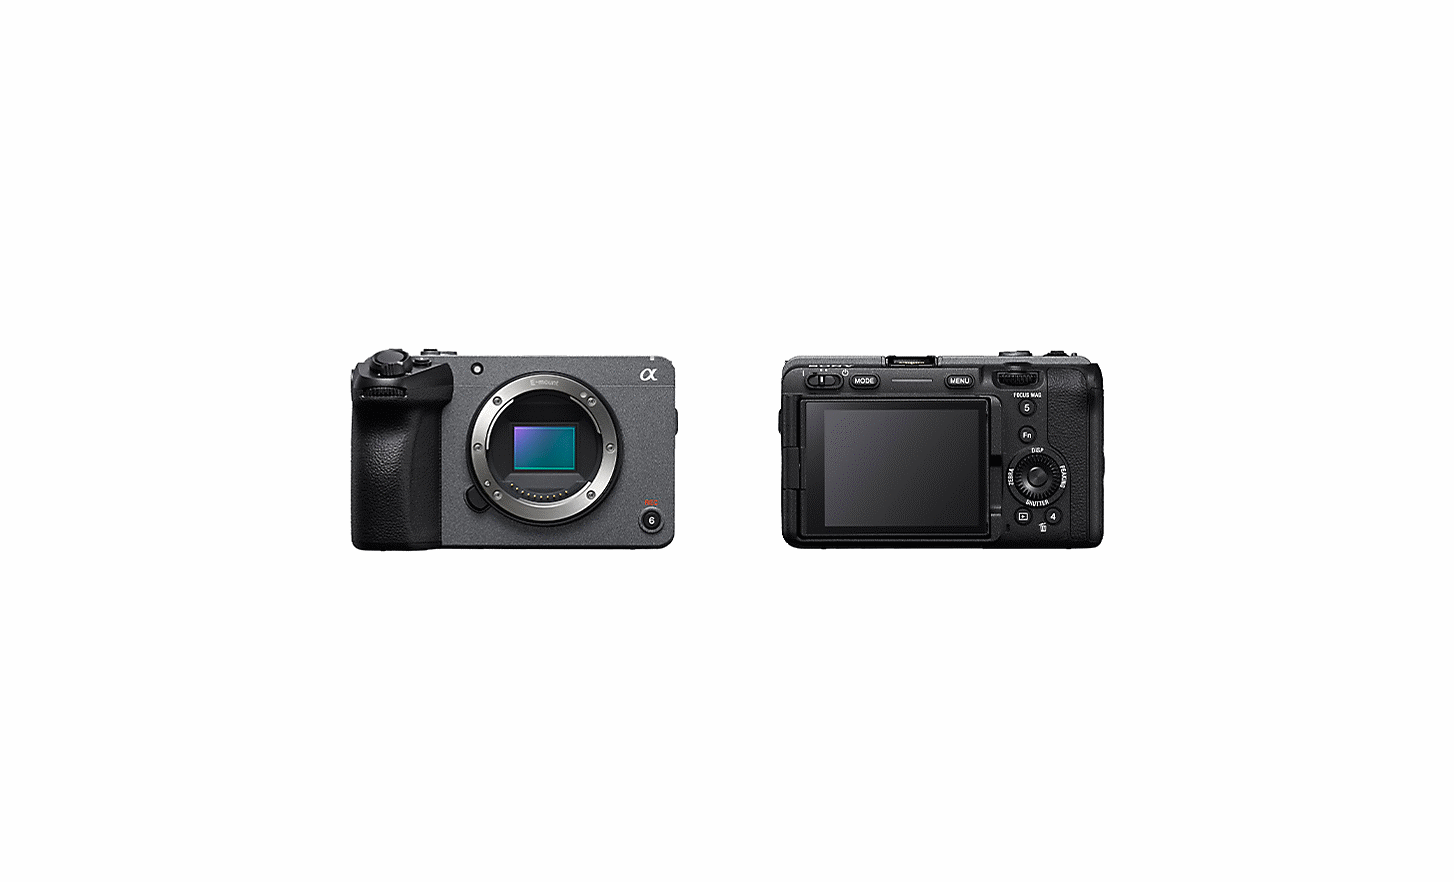 Product images of Left side and Right side